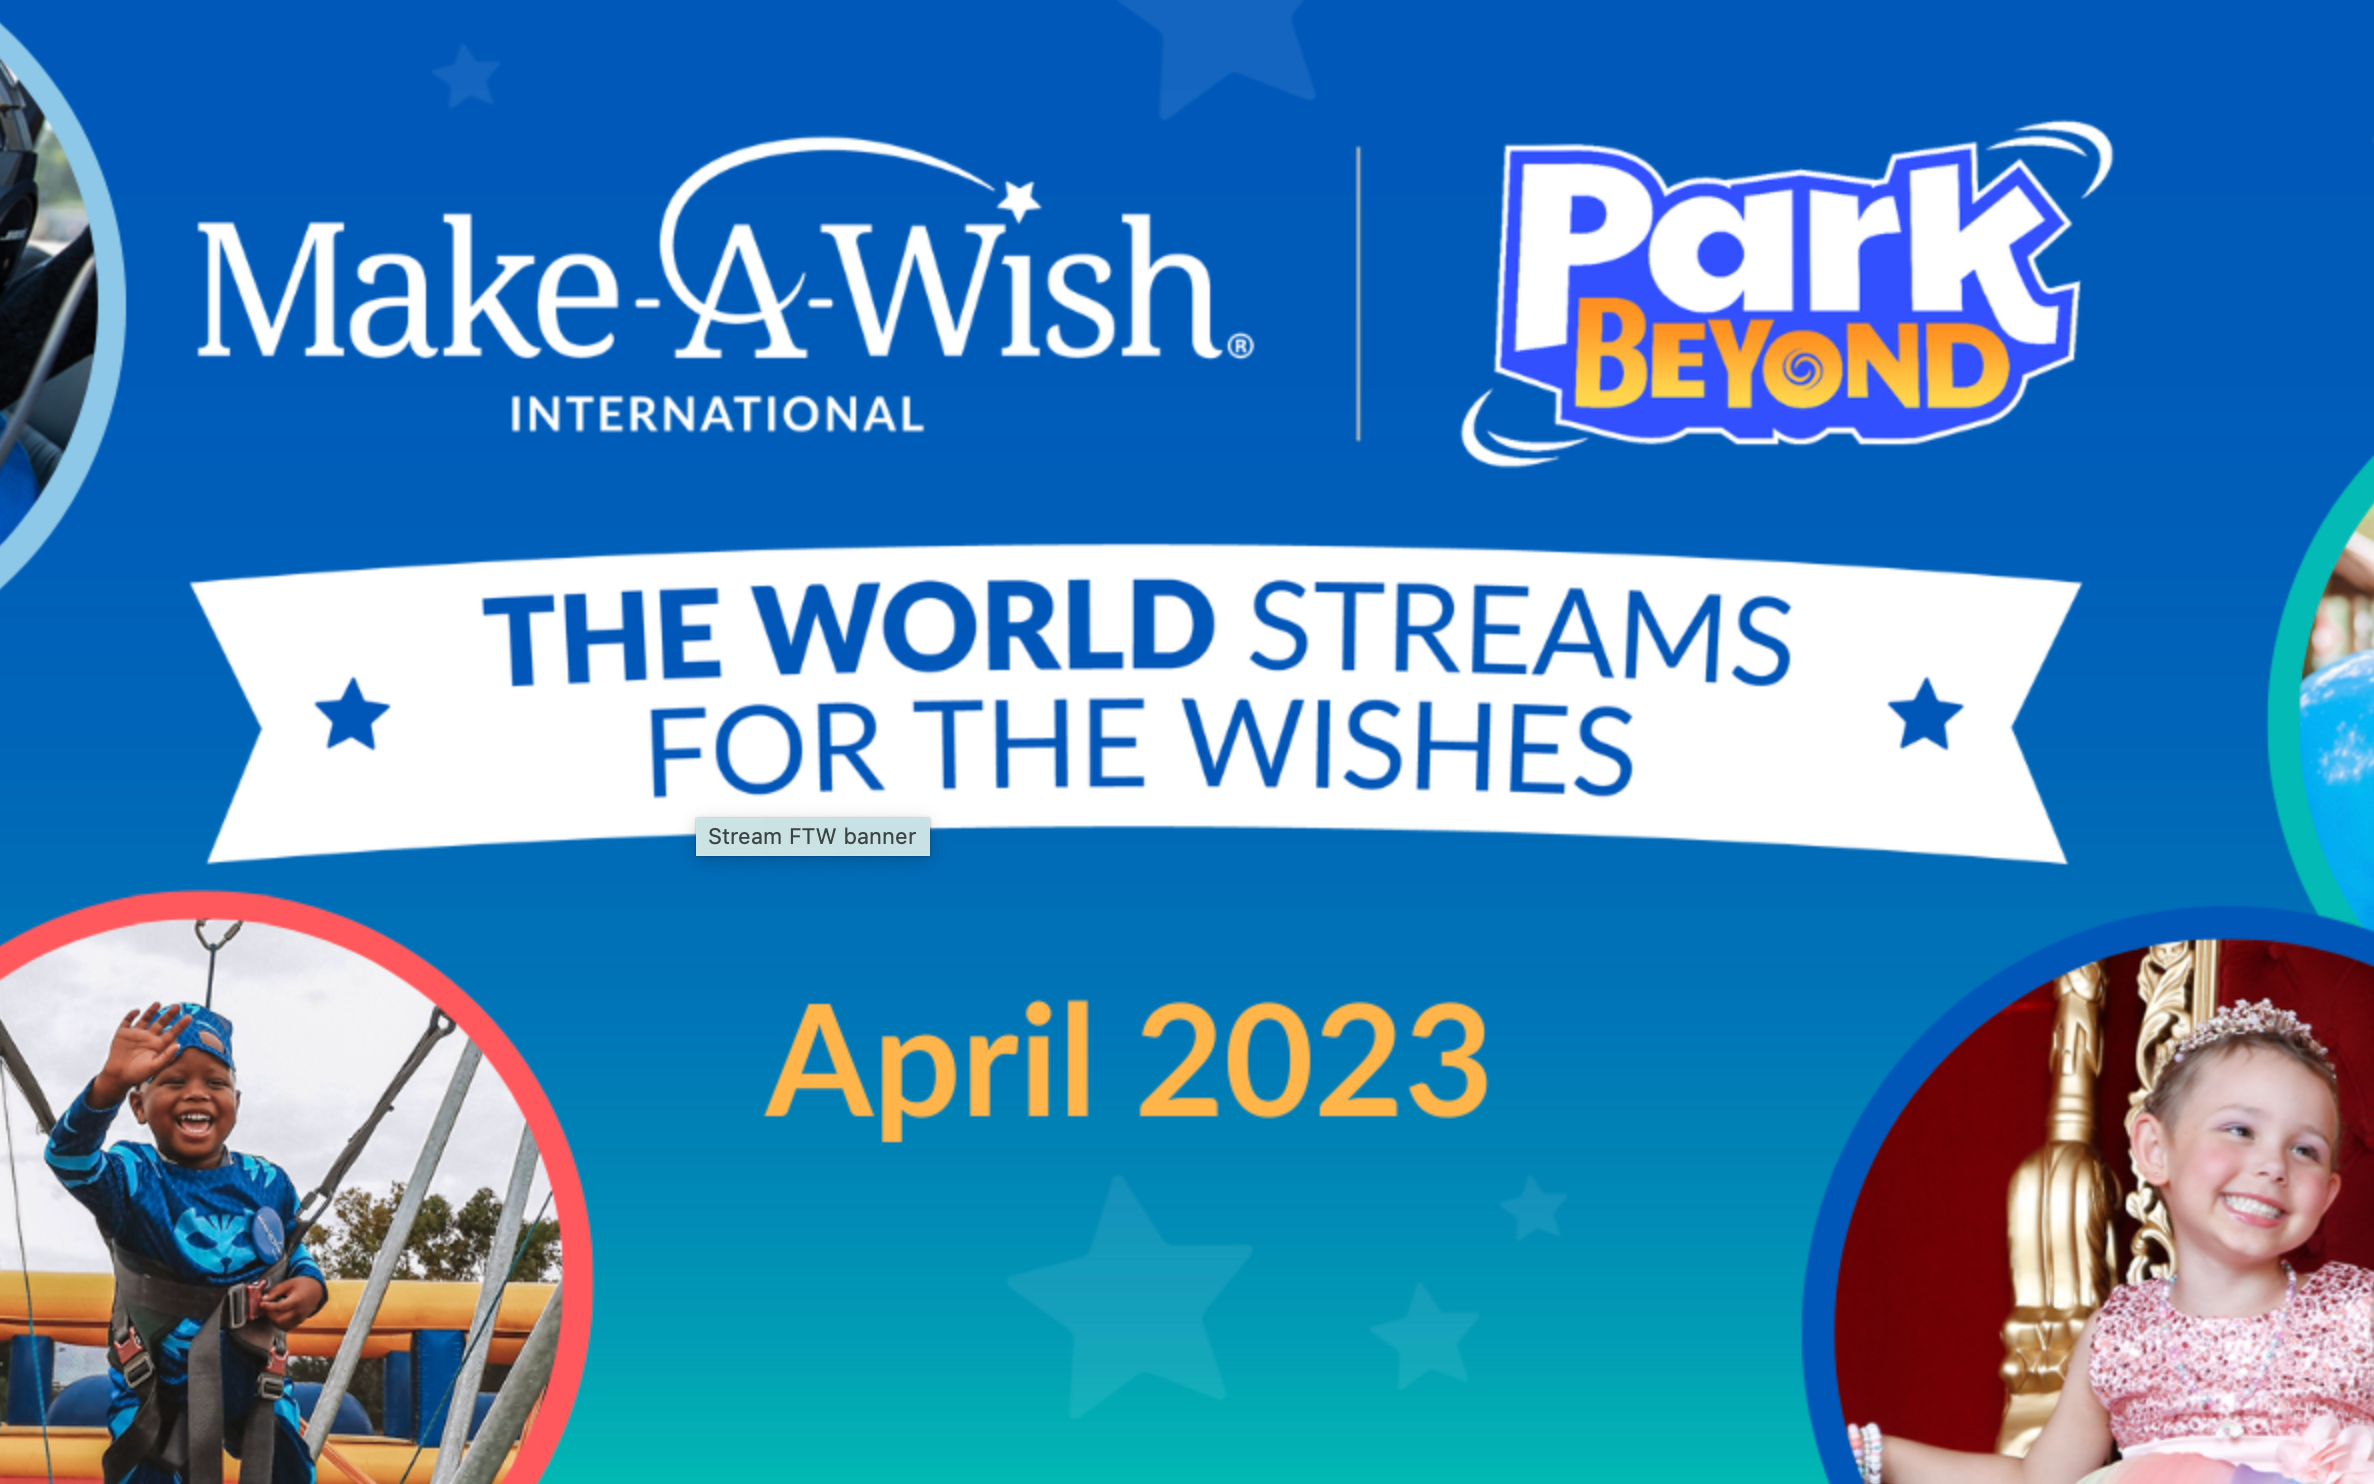 Image for Make-A-Wish's The World Streams For the Wishes (FTW) global livestream fundraiser returns in April